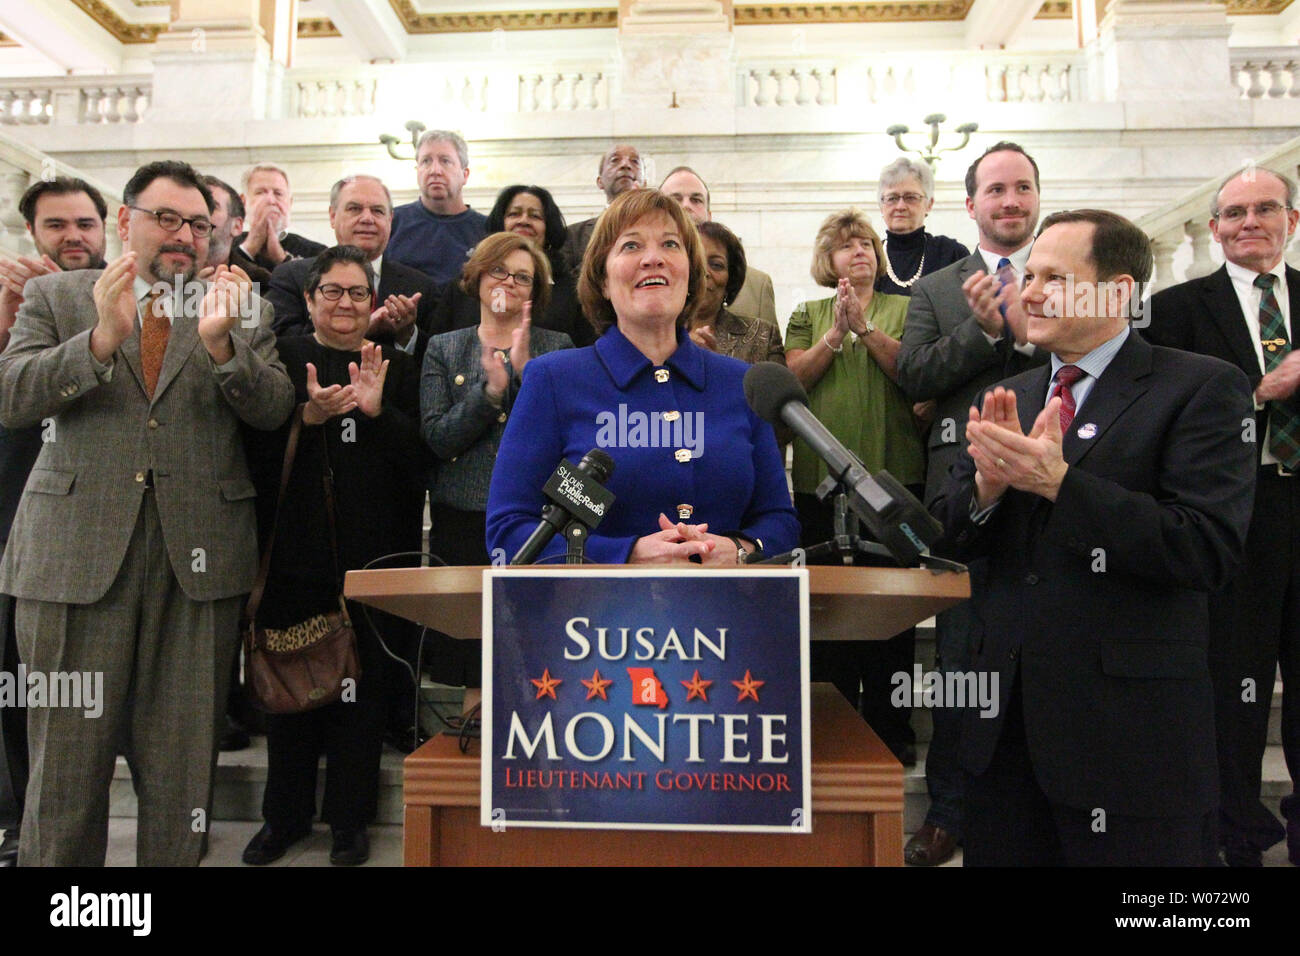 Former Missouri State Auditor Susan Montee is welcomed to the podium by St. Louis Mayor Francis Slay (R) and supporters at St. Louis City Hall, as she announces she will run for the office of Missouri Lieutenant Governor, in St. Louis on February 7, 2012. Montee, a democrate will face current Lt. Governor Peter Kinder, a republican. UPI/Bill Greenblatt Stock Photo